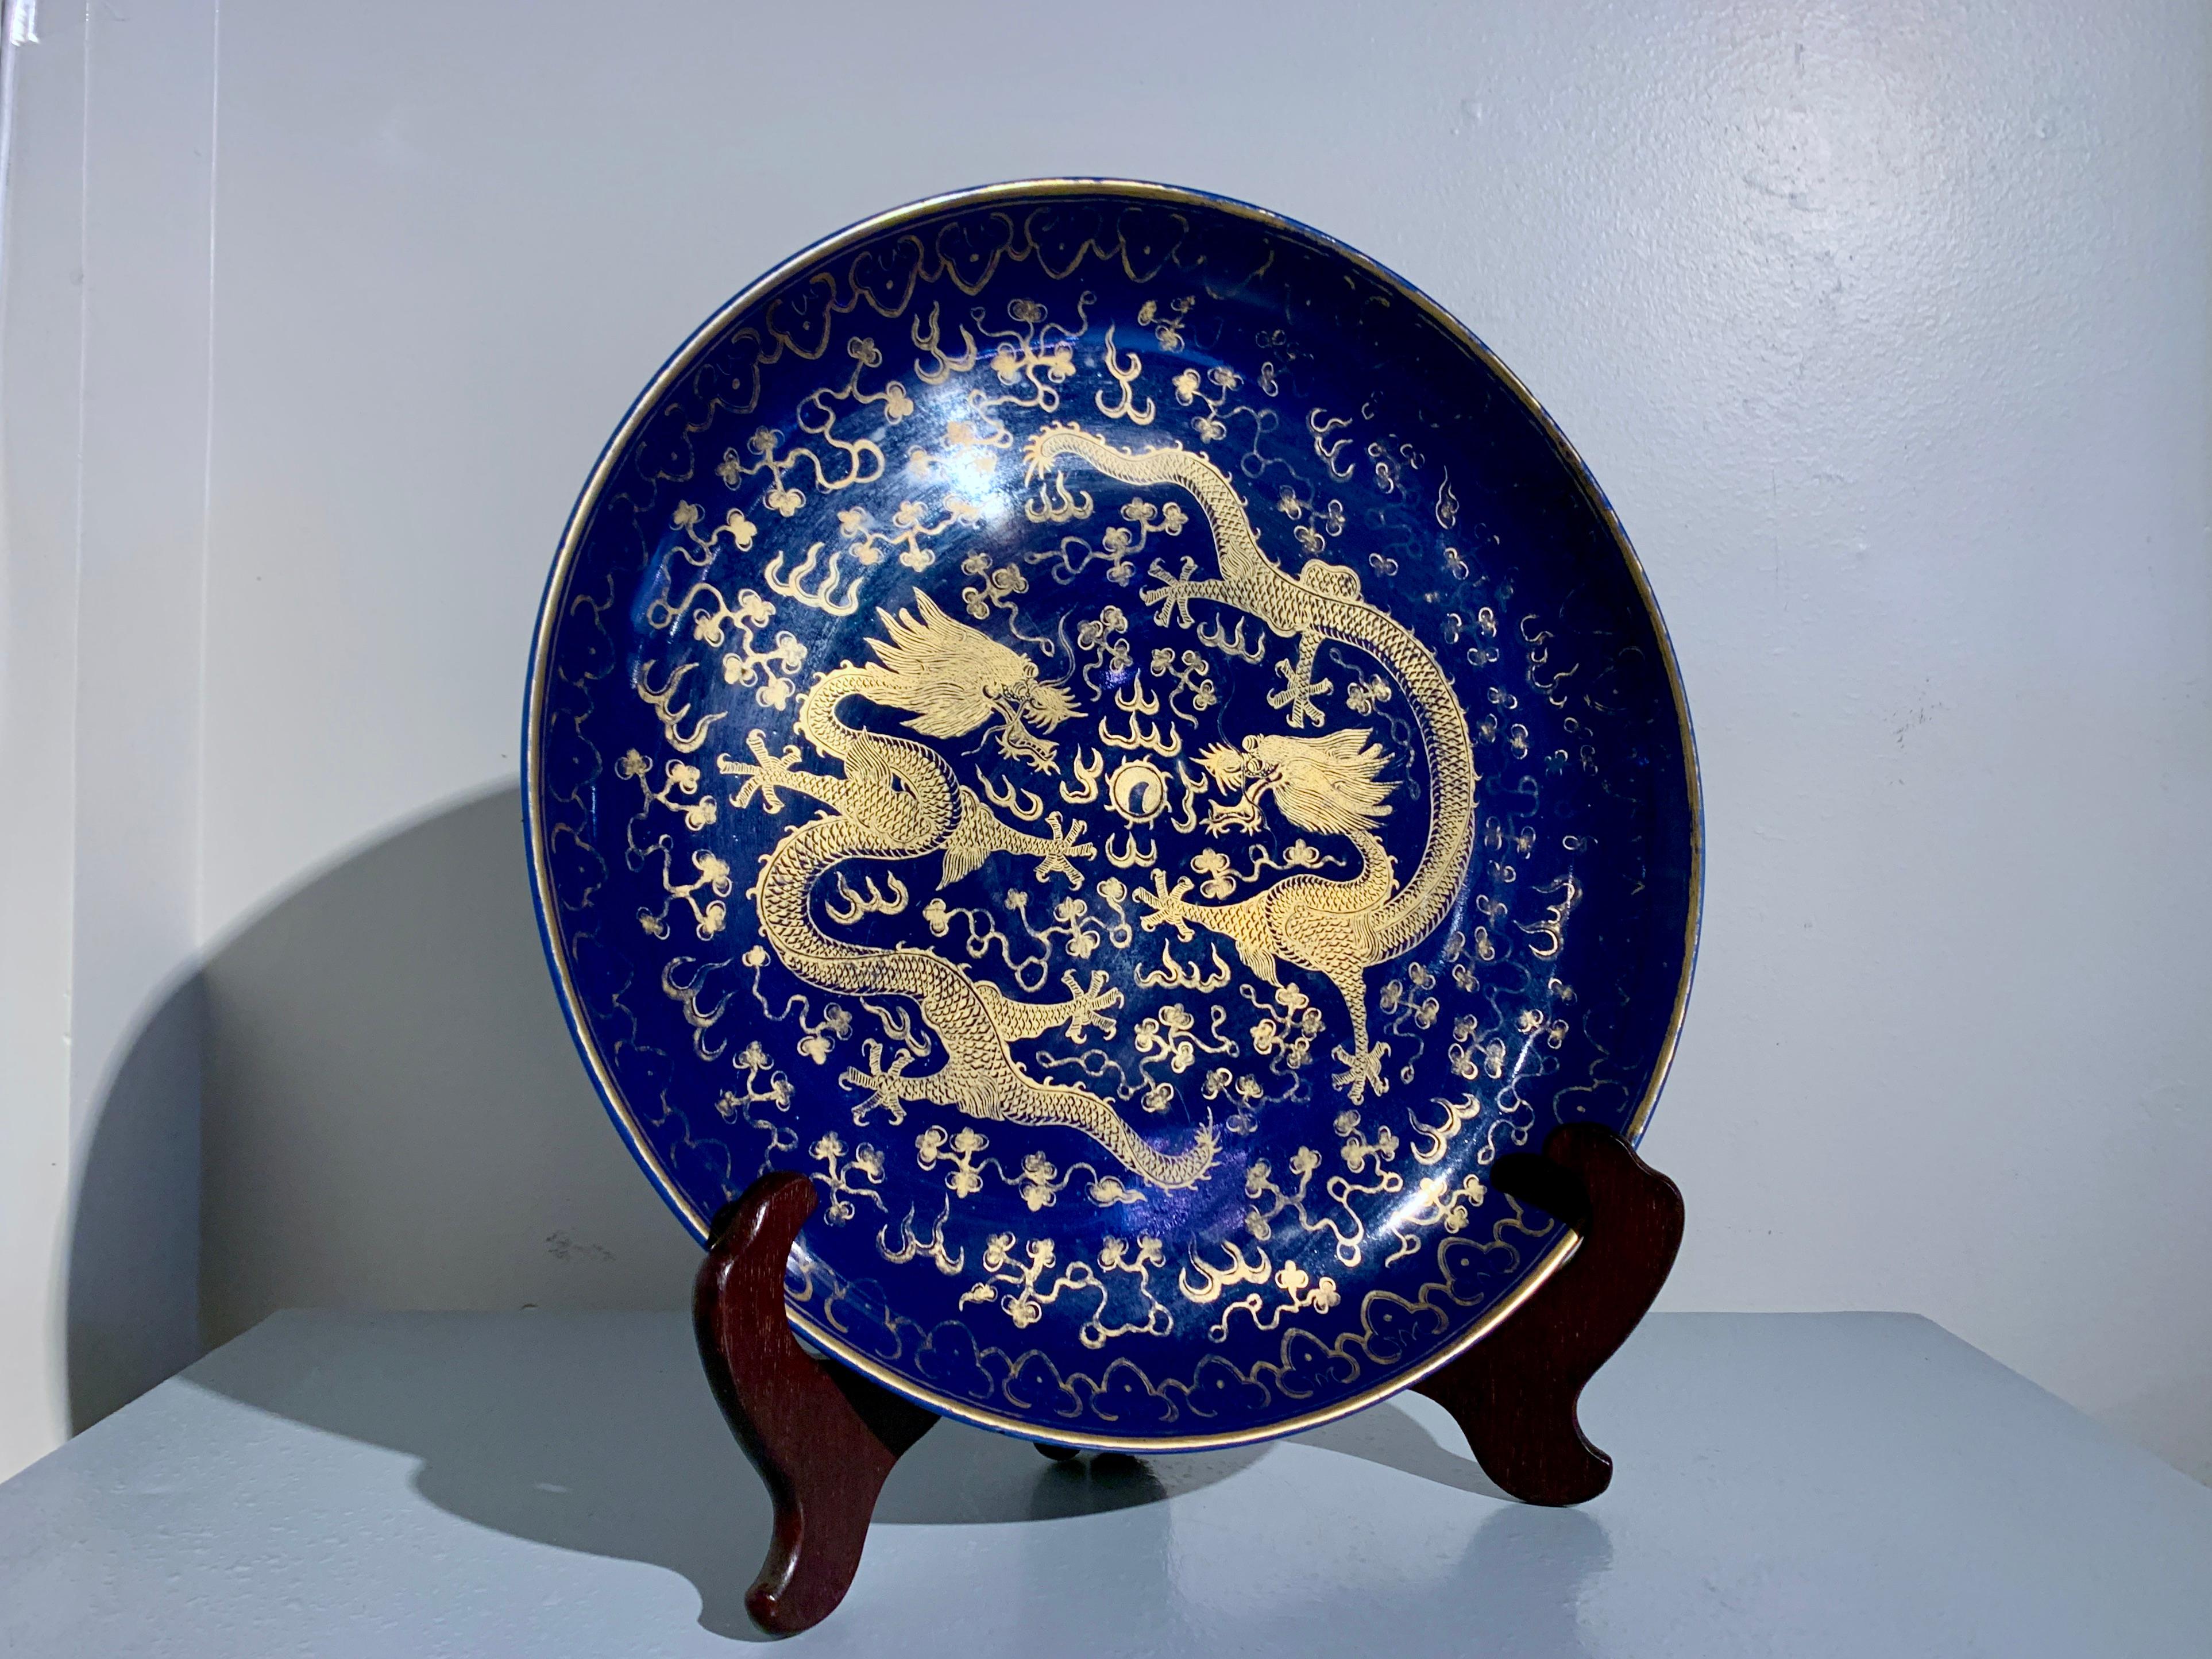 A magnificent Chinese powder blue glazed porcelain charger with painted gilt decoration, late Qing Dynasty, circa 1900, China.

The large and impressive Chinese porcelain charger glazed a rich and deep cobalt blue, known as powder blue, and gilt